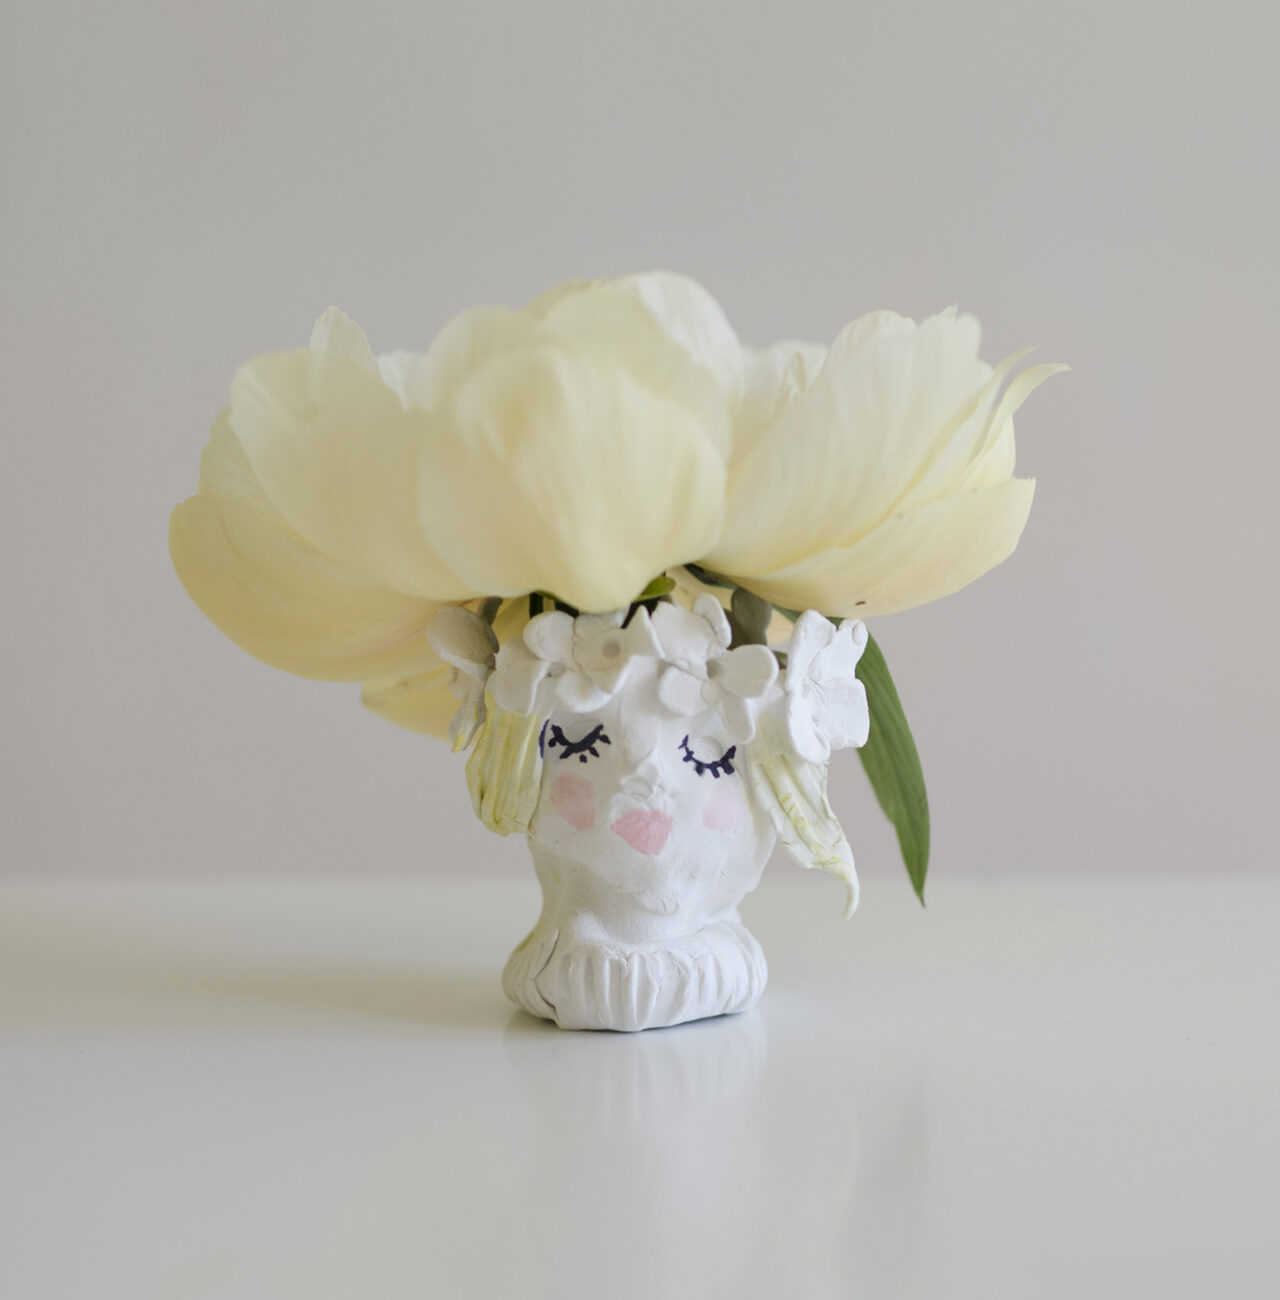 Beautiful Flower Face Vase Craft Using Clay